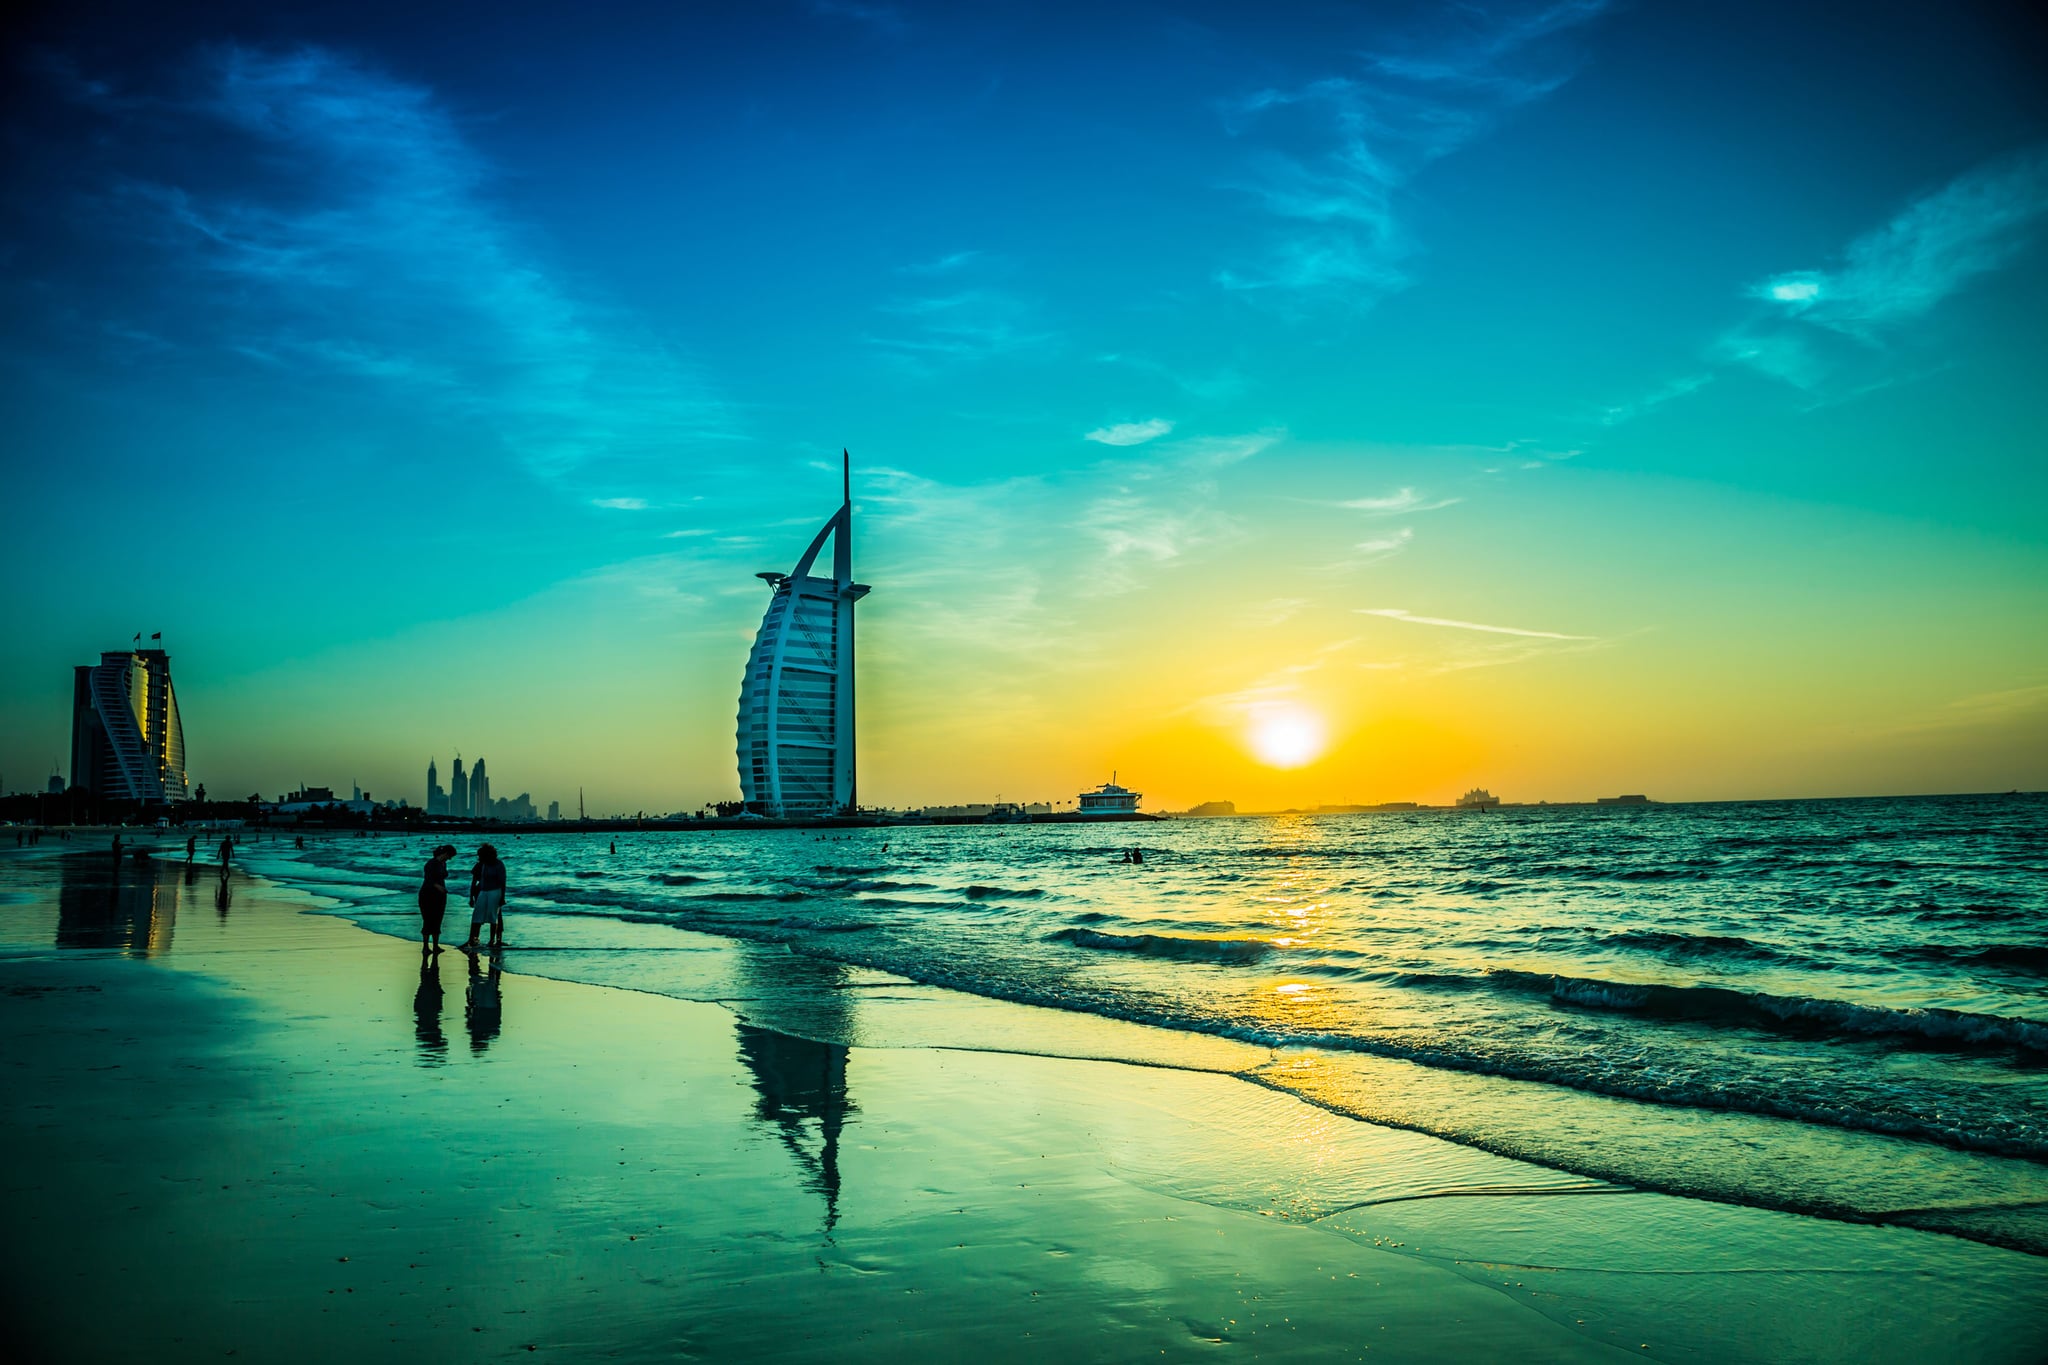 Get Your Towels and Sunscreen Ready Because Dubai Has Reopened Its Public Beaches